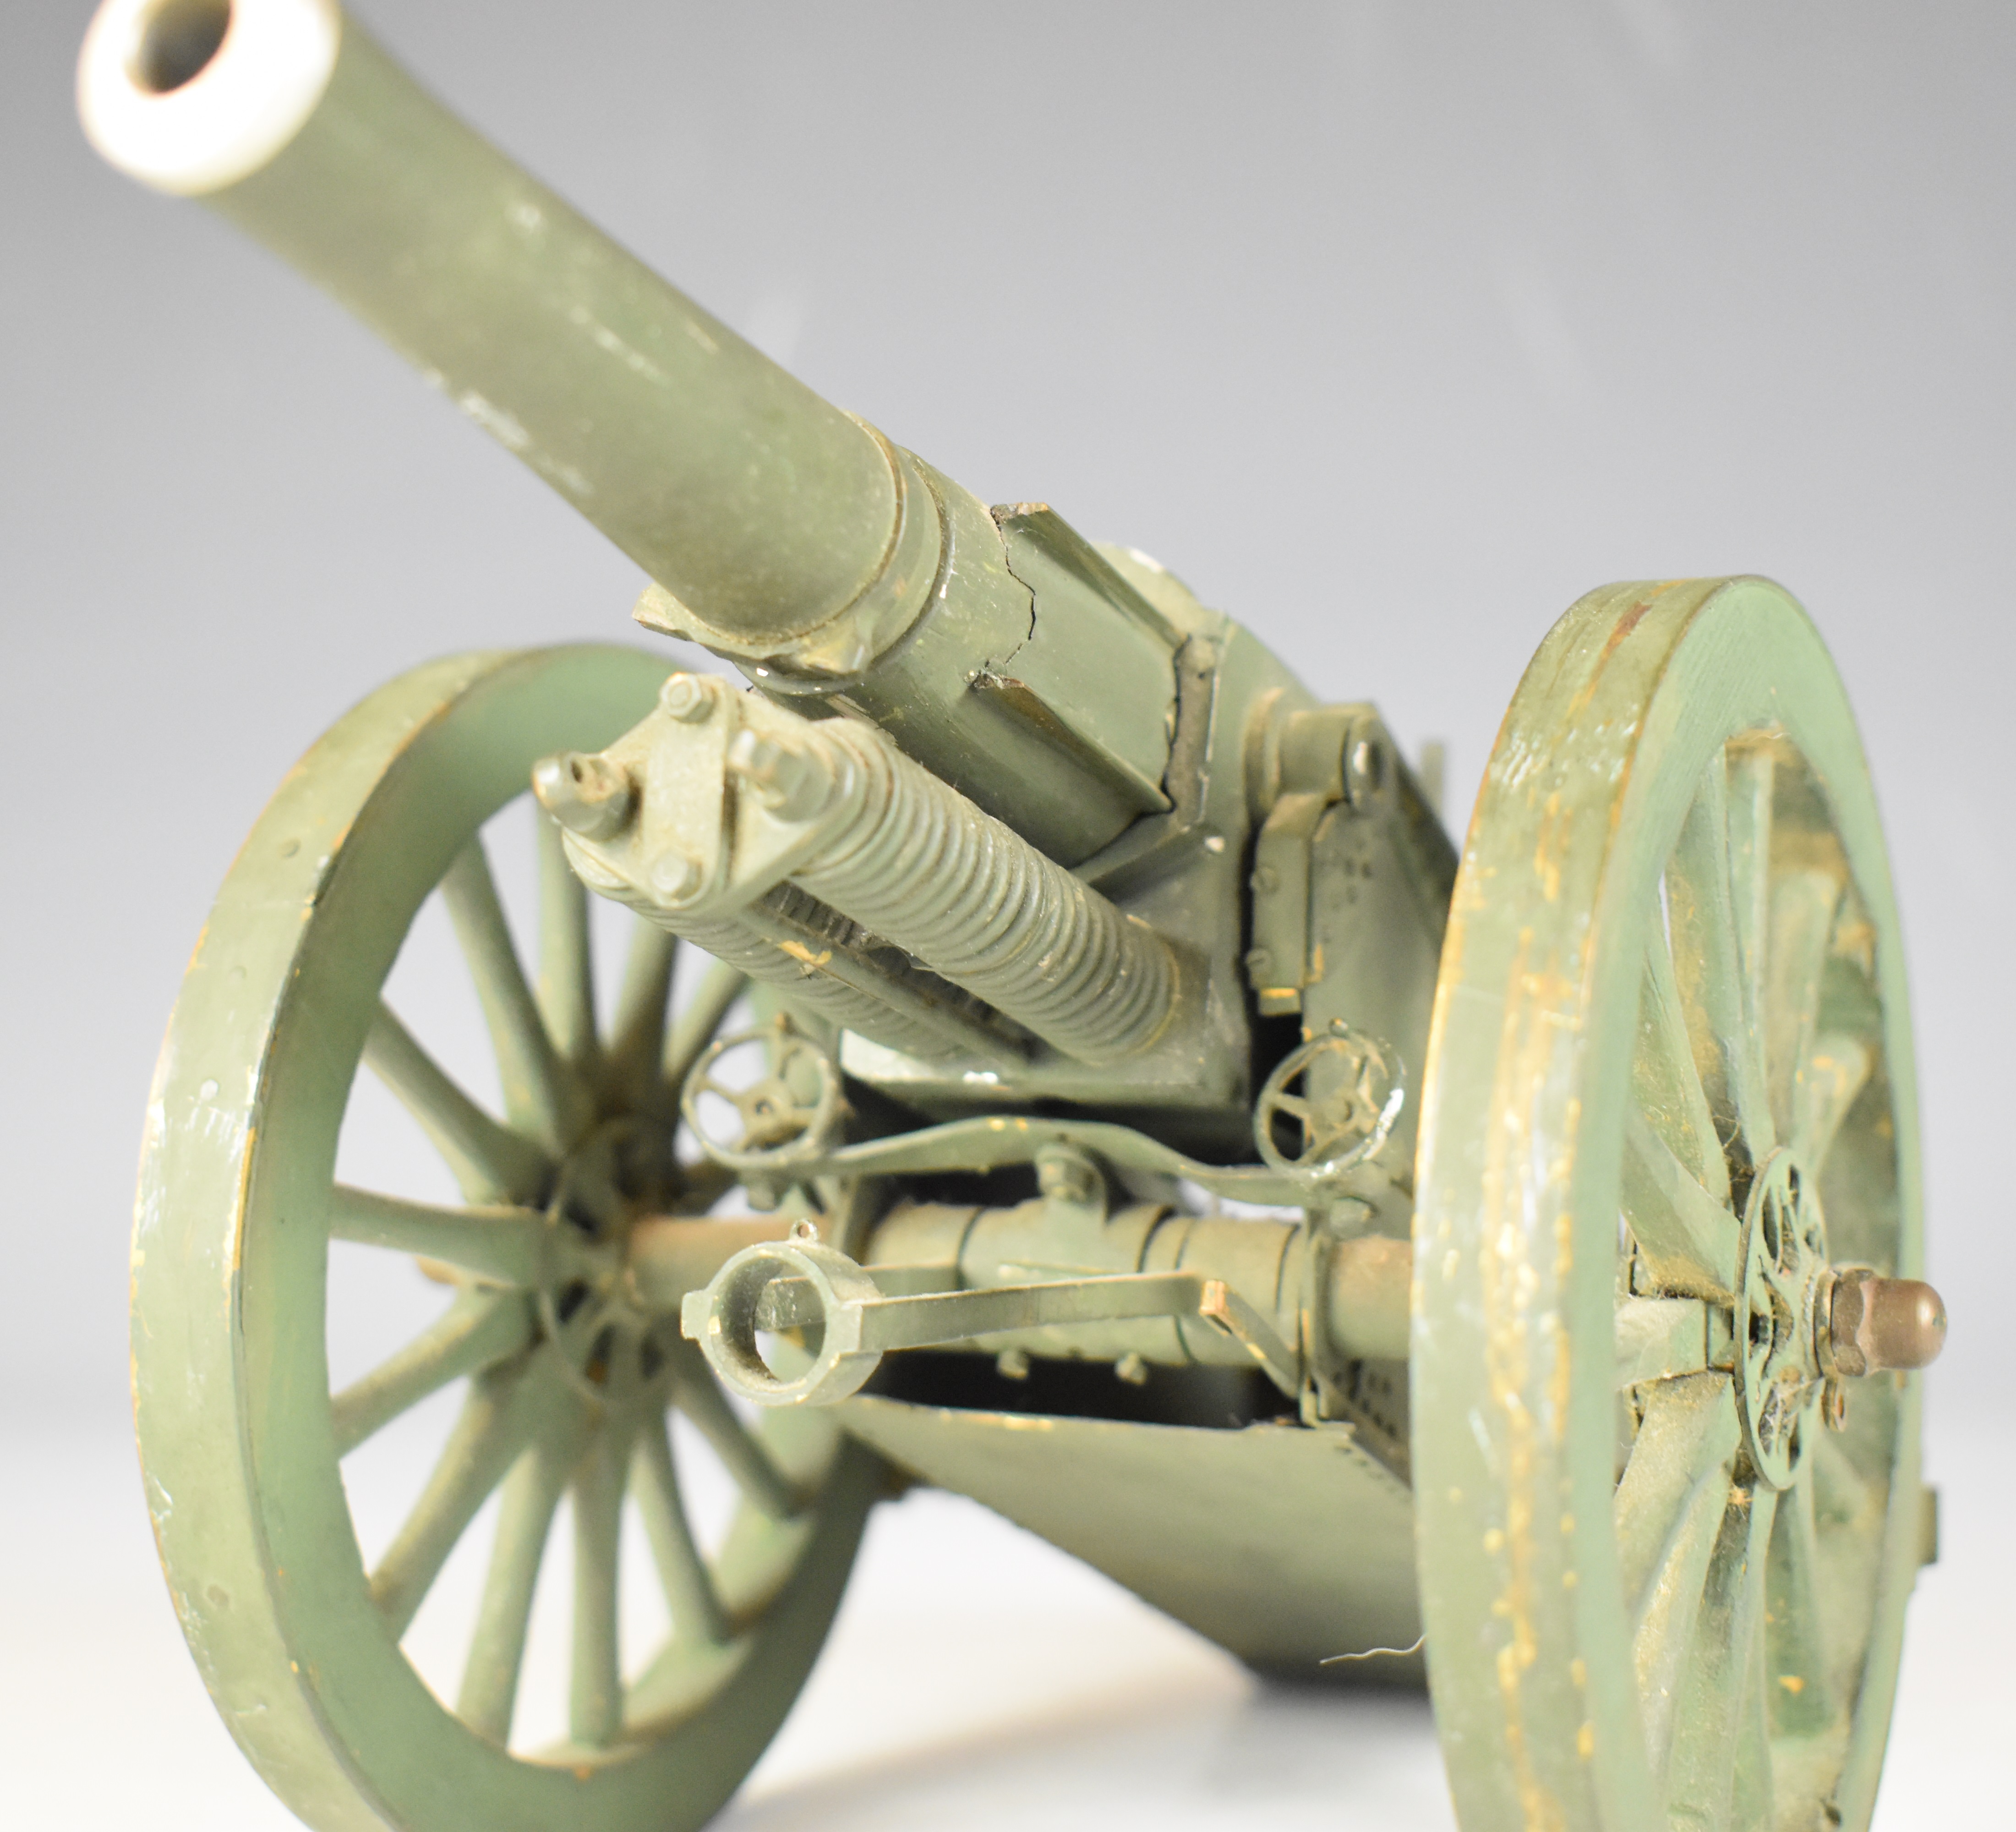 Breech loading desk cannon or field gun with 7 inch graduated barrel, overall length 28.5cm. - Image 7 of 8